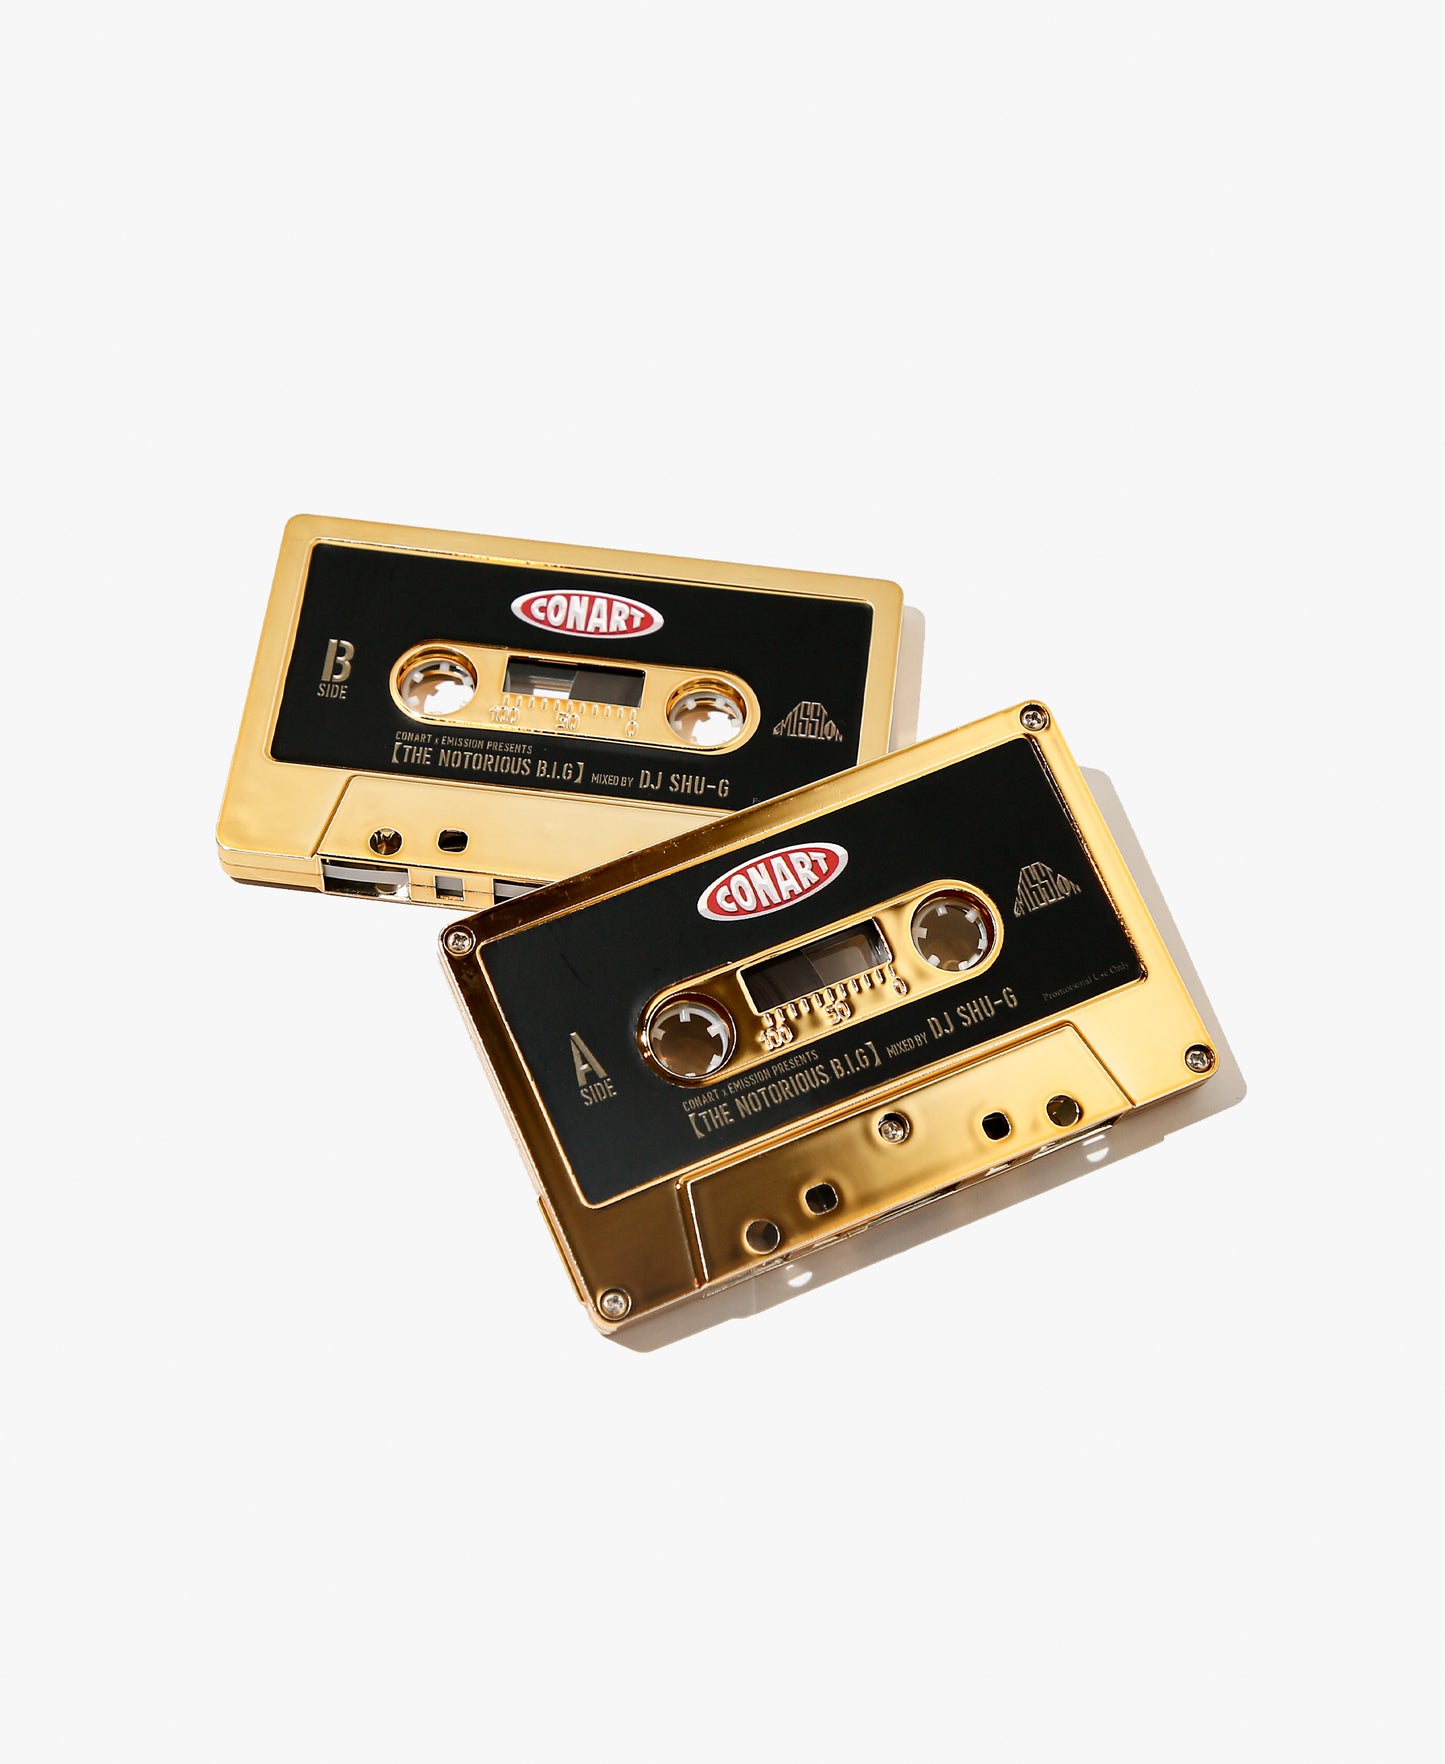 [CASSETTE TAPE] The Notorious BIG Mix